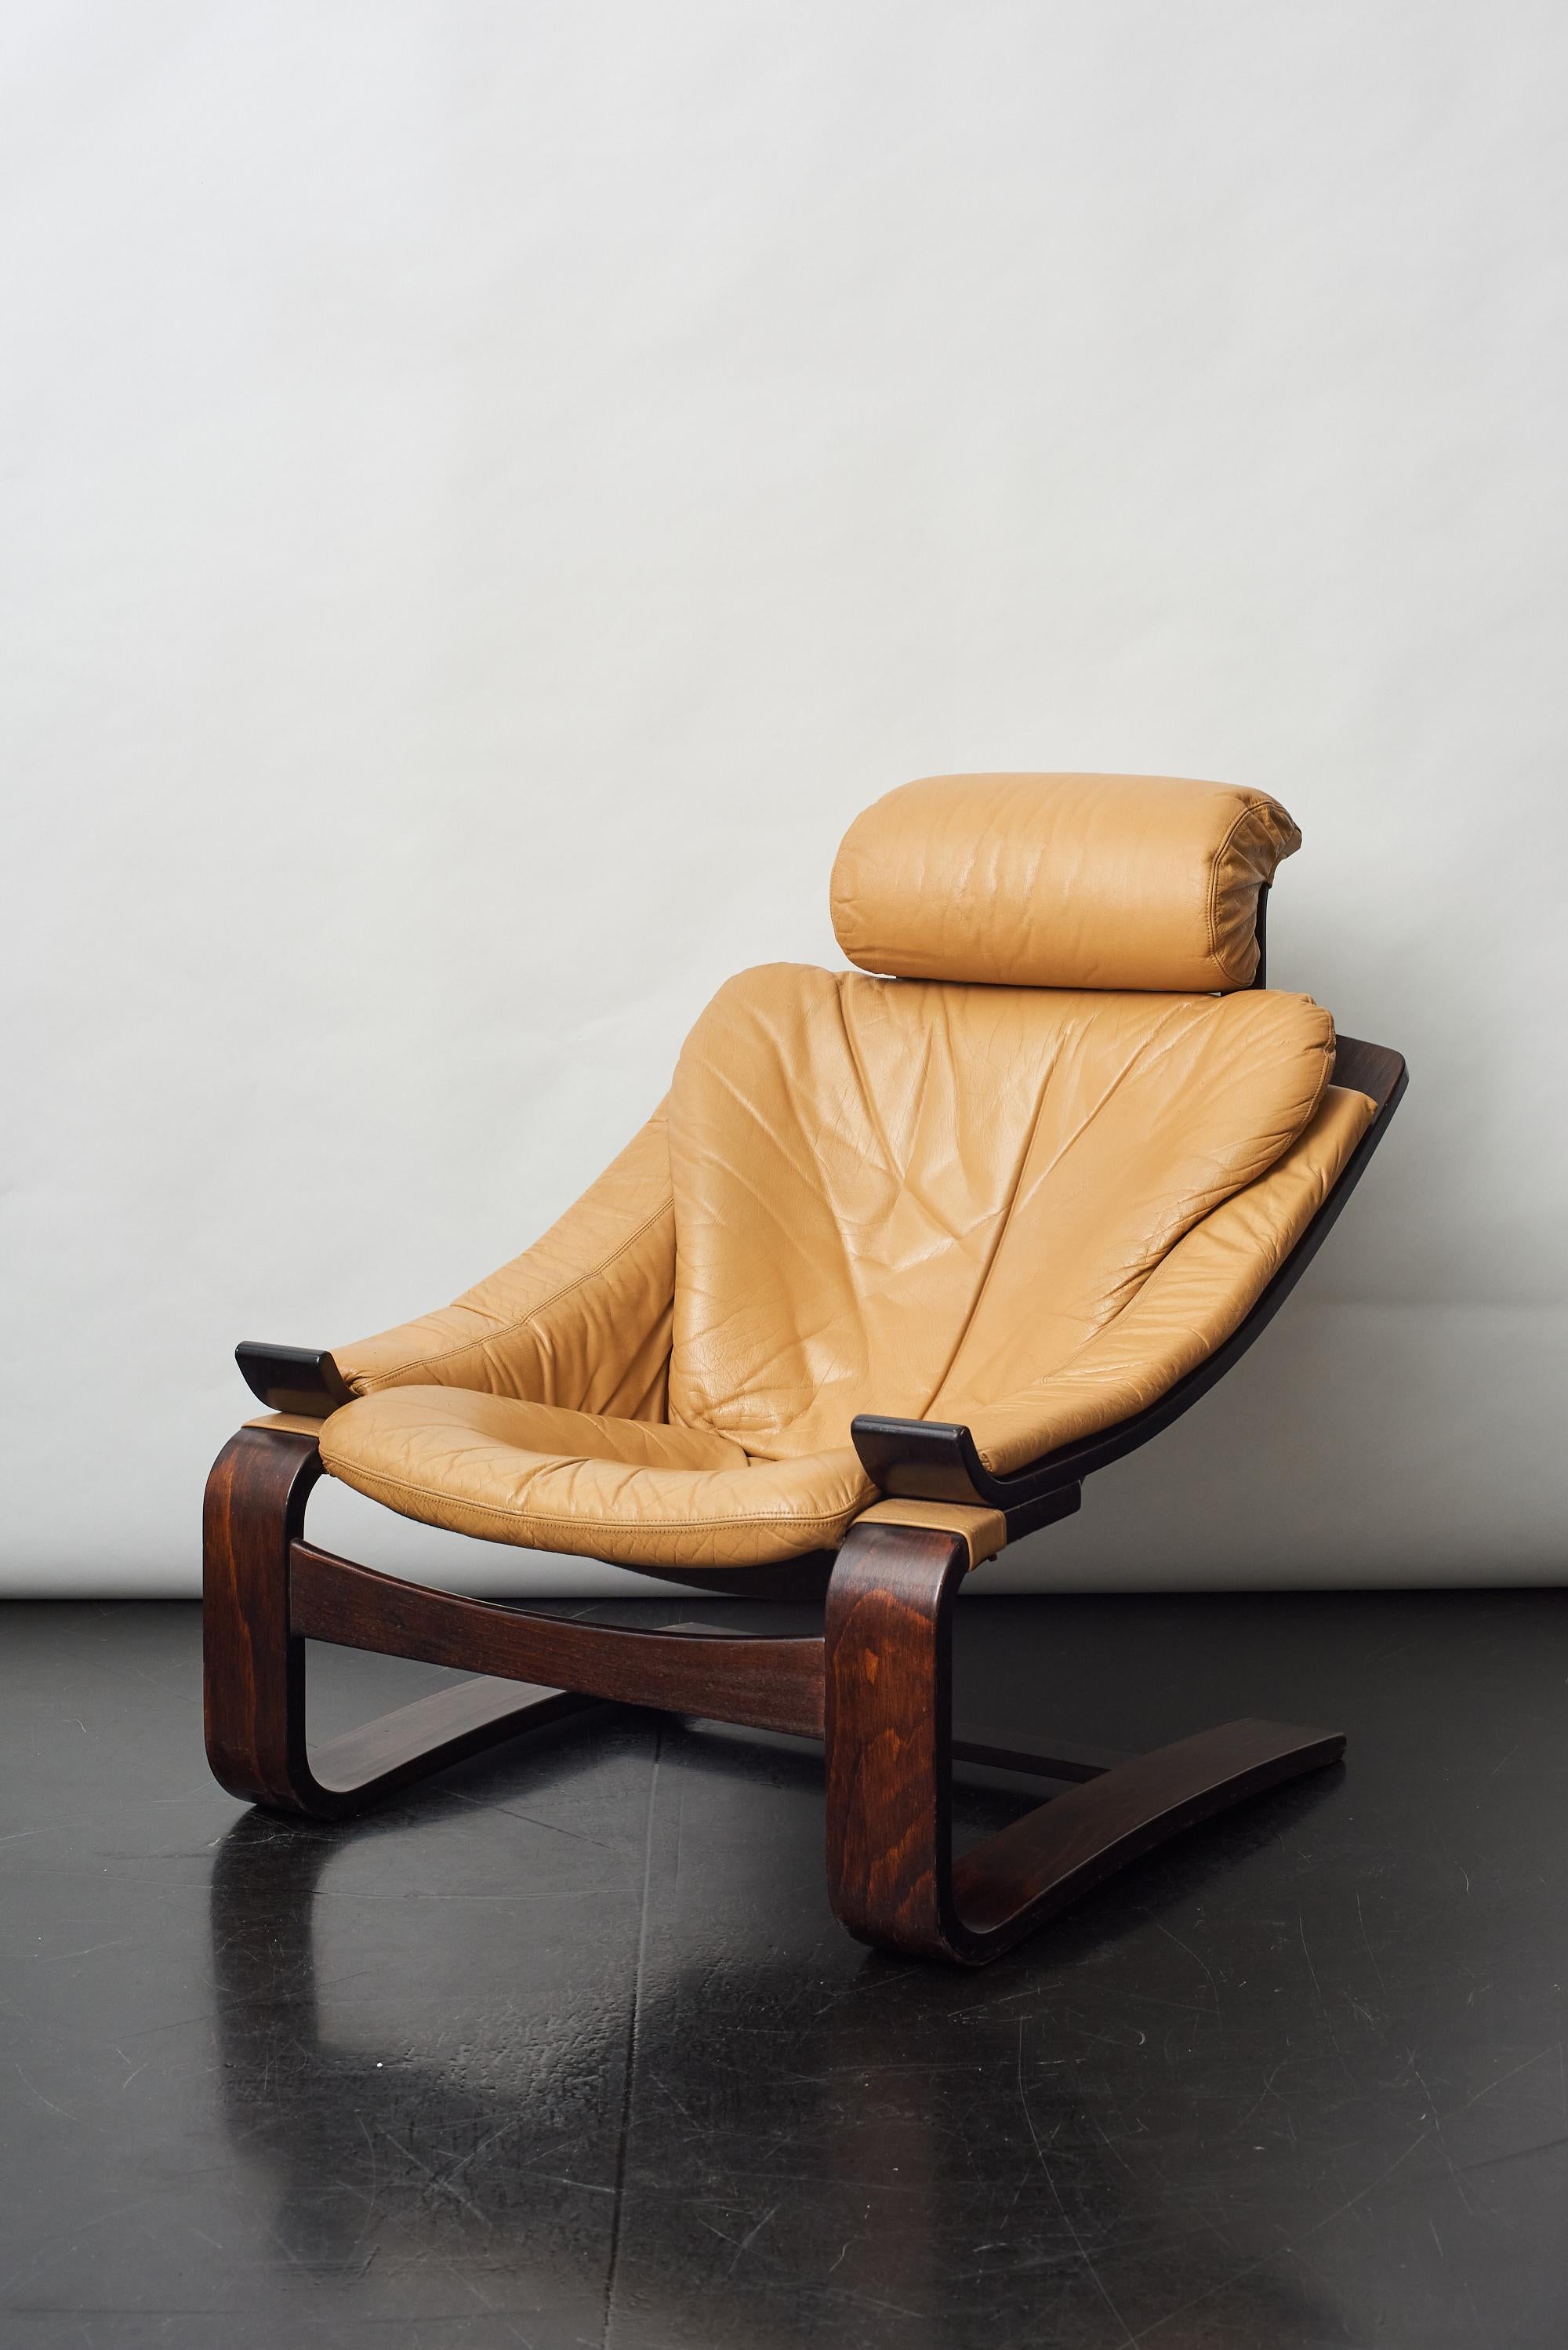 Cognac leather bentwood rosewood ‘Kroken’ lounge chair designed by Ake Fribytter, Sweden 1974.
Super comfortable cantilever lounge chair!
Very good condition!